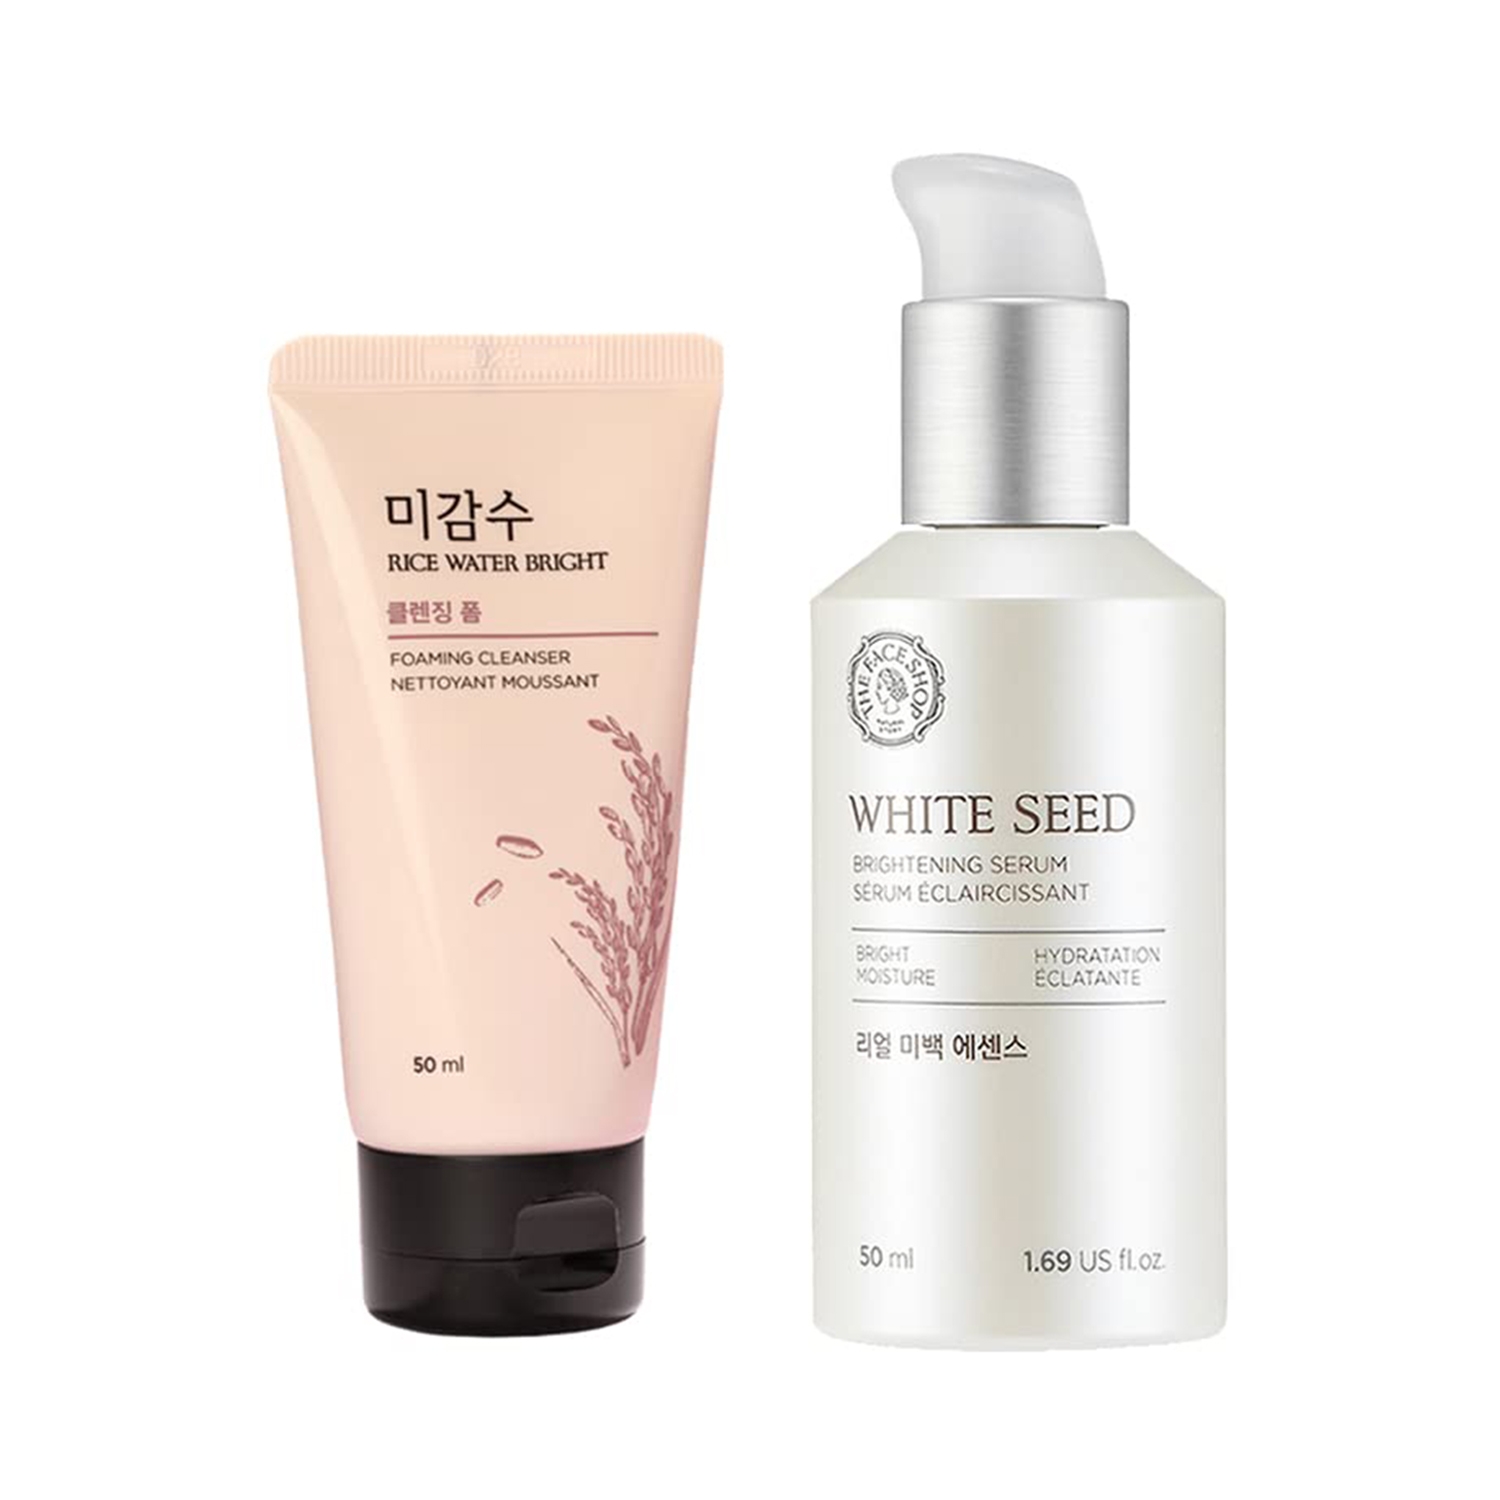 The Face Shop | The Face Shop 2 Step White Seed Brightening Combo